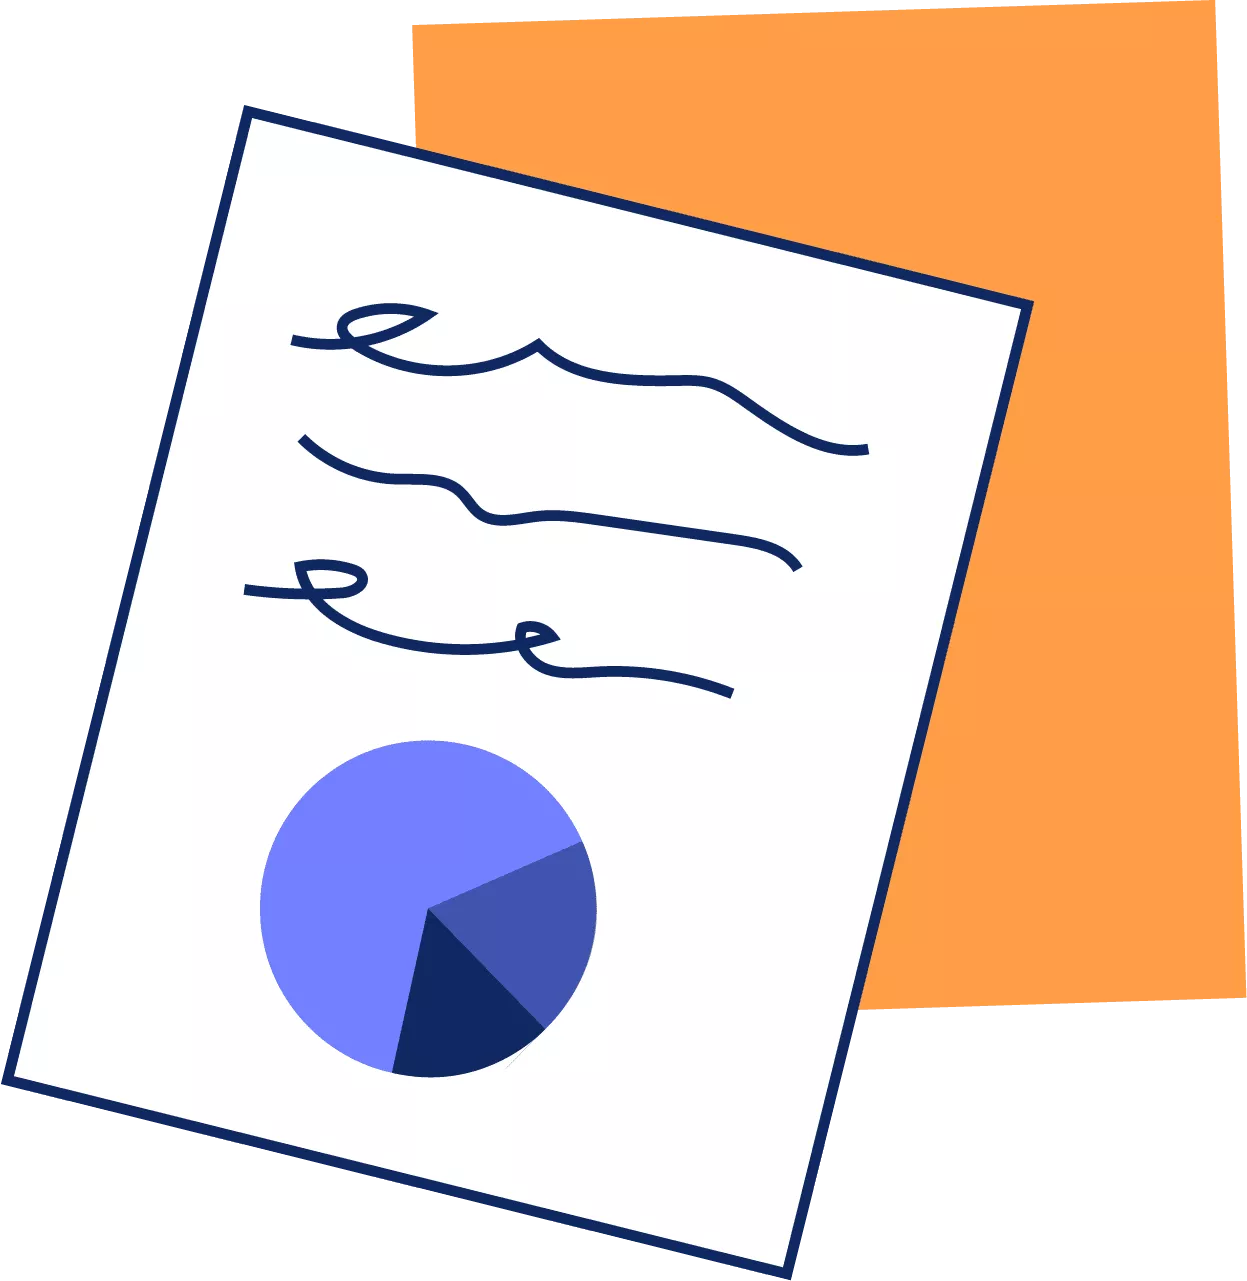 An illustration of a report with a graph